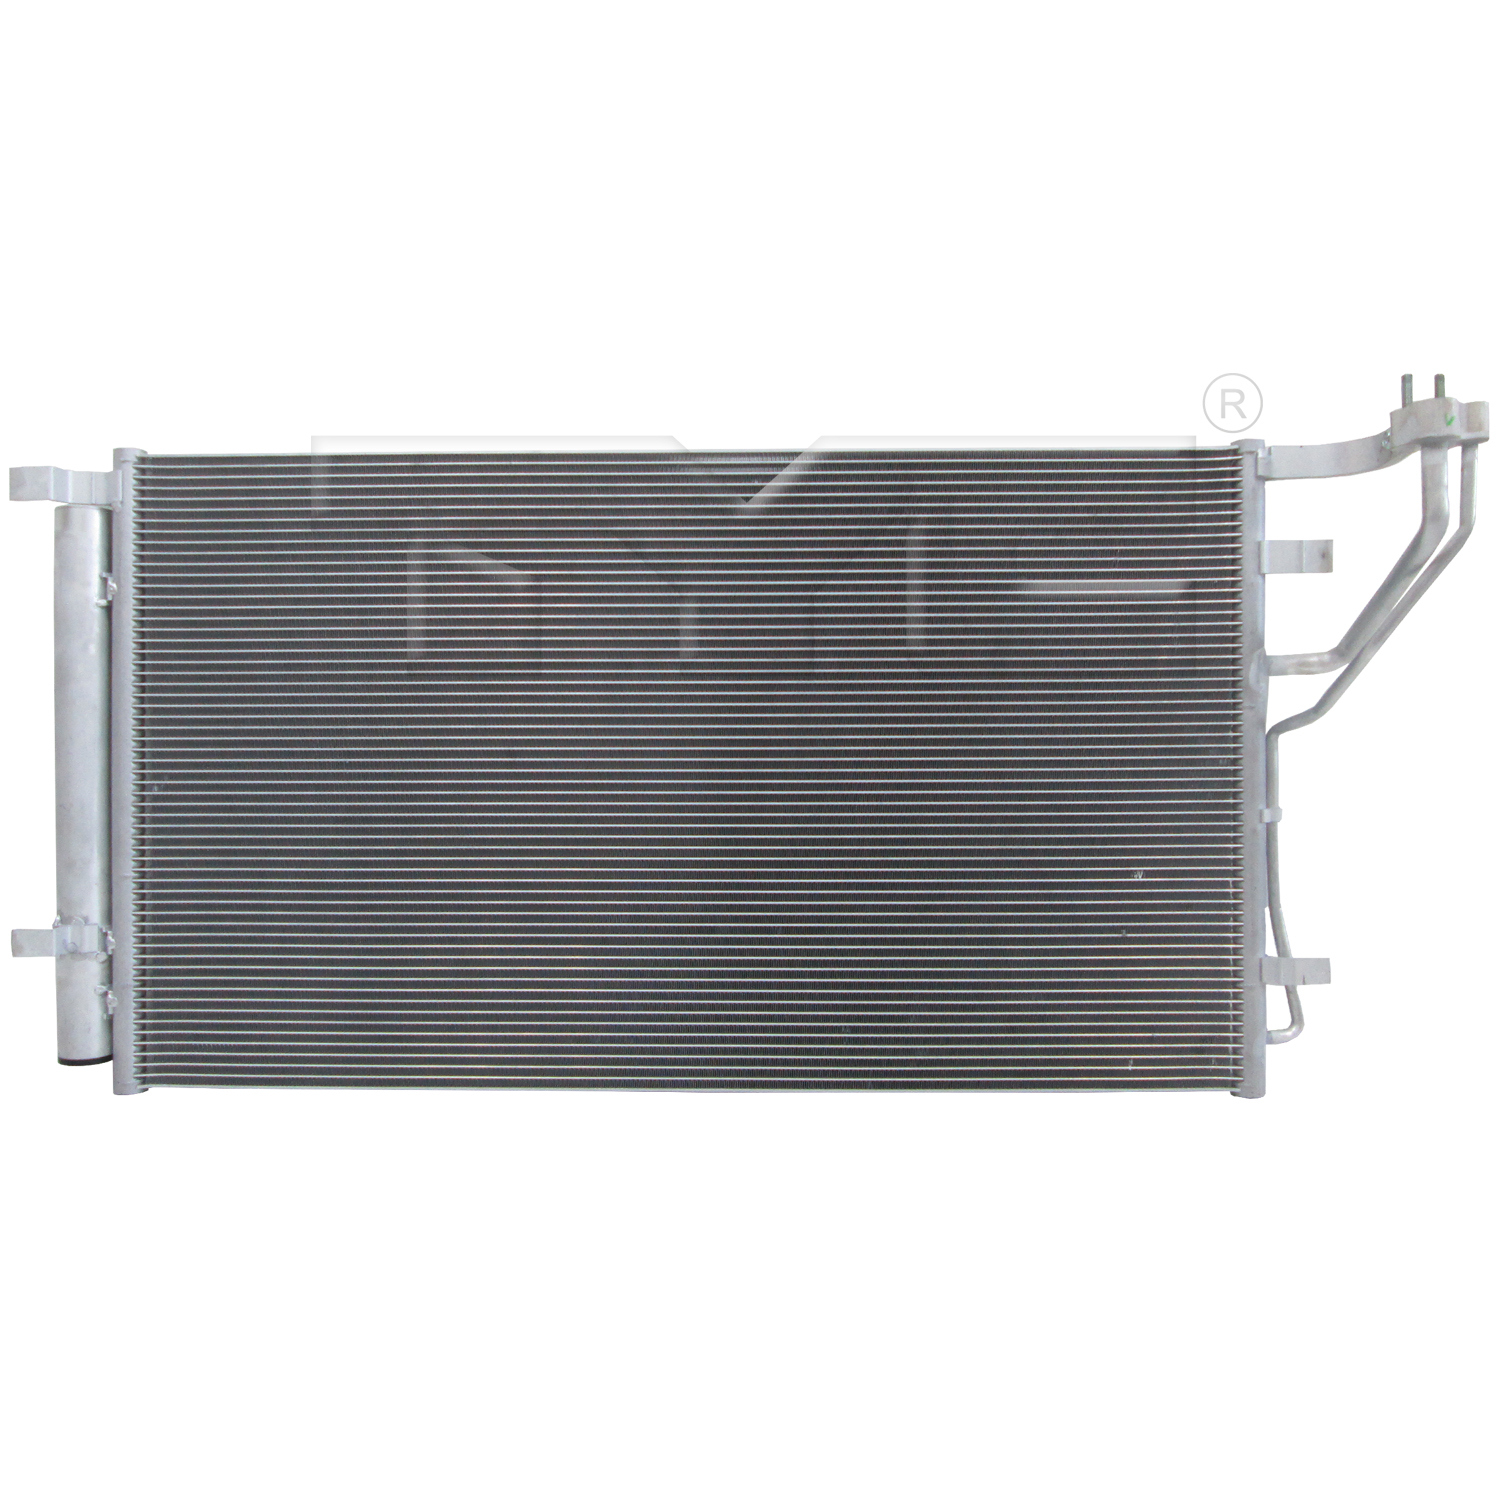 Aftermarket AC CONDENSERS for KIA - OPTIMA, OPTIMA,17-18,Air conditioning condenser